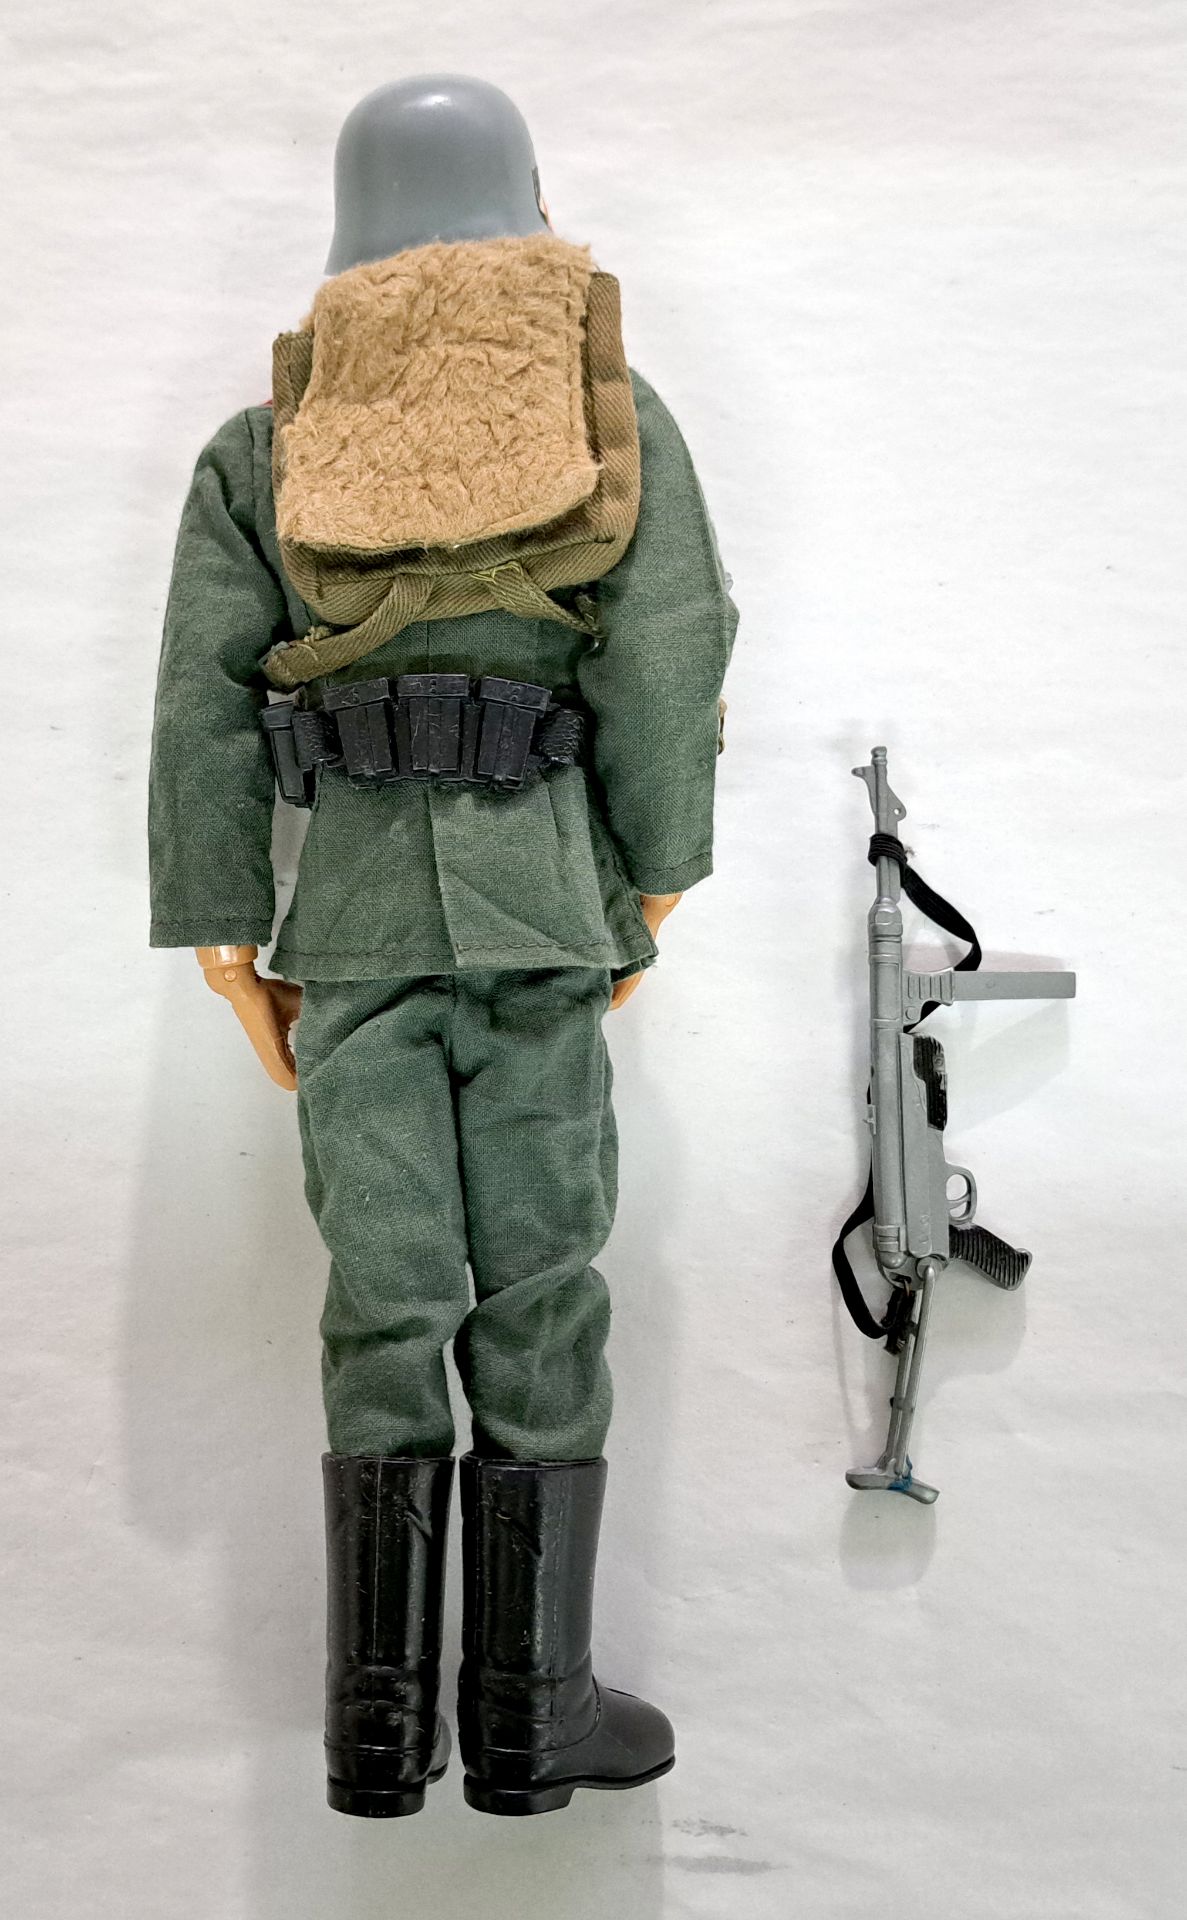 Palitoy Action Man German Stormtrooper - Soldiers of the World, dark hair, blue pants, eagle-eyes... - Image 2 of 2